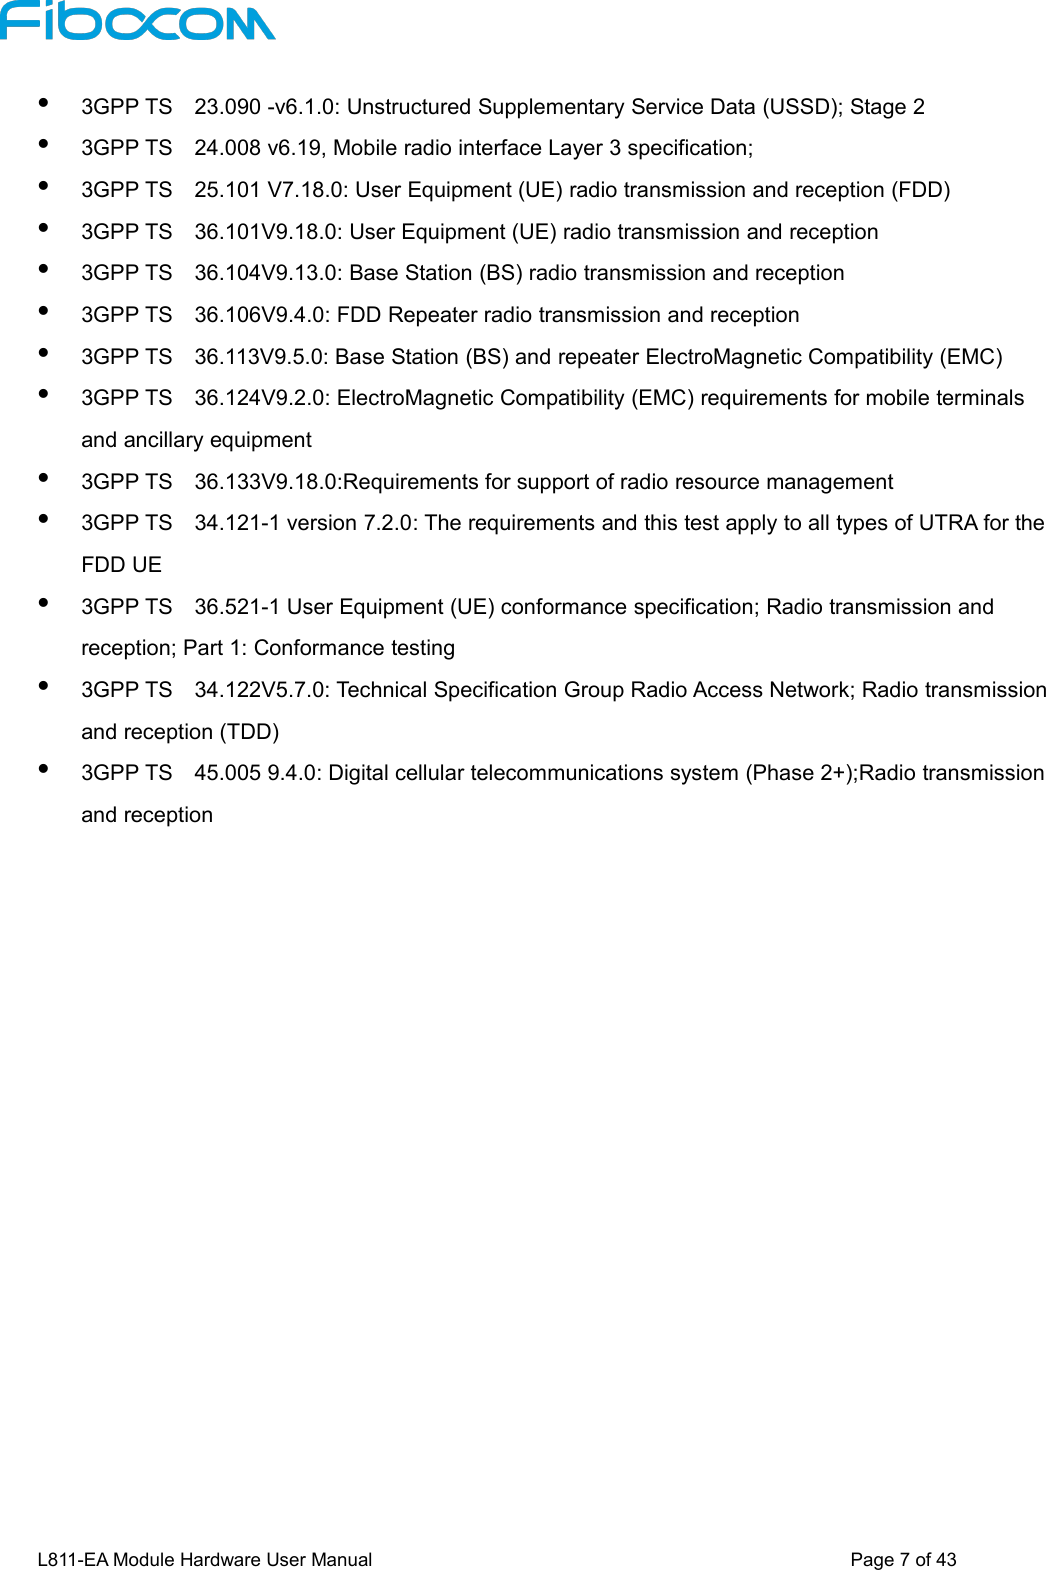 L811-EA Module Hardware User Manual Page7of433GPP TS 23.090 -v6.1.0: Unstructured Supplementary Service Data (USSD); Stage 23GPP TS 24.008 v6.19, Mobile radio interface Layer 3 specification;3GPP TS 25.101 V7.18.0: User Equipment (UE) radio transmission and reception (FDD)3GPP TS 36.101V9.18.0: User Equipment (UE) radio transmission and reception3GPP TS 36.104V9.13.0: Base Station (BS) radio transmission and reception3GPP TS 36.106V9.4.0: FDD Repeater radio transmission and reception3GPP TS 36.113V9.5.0: Base Station (BS) and repeater ElectroMagnetic Compatibility (EMC)3GPP TS 36.124V9.2.0: ElectroMagnetic Compatibility (EMC) requirements for mobile terminalsand ancillary equipment3GPP TS 36.133V9.18.0:Requirements for support of radio resource management3GPP TS 34.121-1 version 7.2.0: The requirements and this test apply to all types of UTRA for theFDD UE3GPP TS 36.521-1 User Equipment (UE) conformance specification; Radio transmission andreception; Part 1: Conformance testing3GPP TS 34.122V5.7.0: Technical Specification Group Radio Access Network; Radio transmissionand reception (TDD)3GPP TS 45.005 9.4.0: Digital cellular telecommunications system (Phase 2+);Radio transmissionand reception